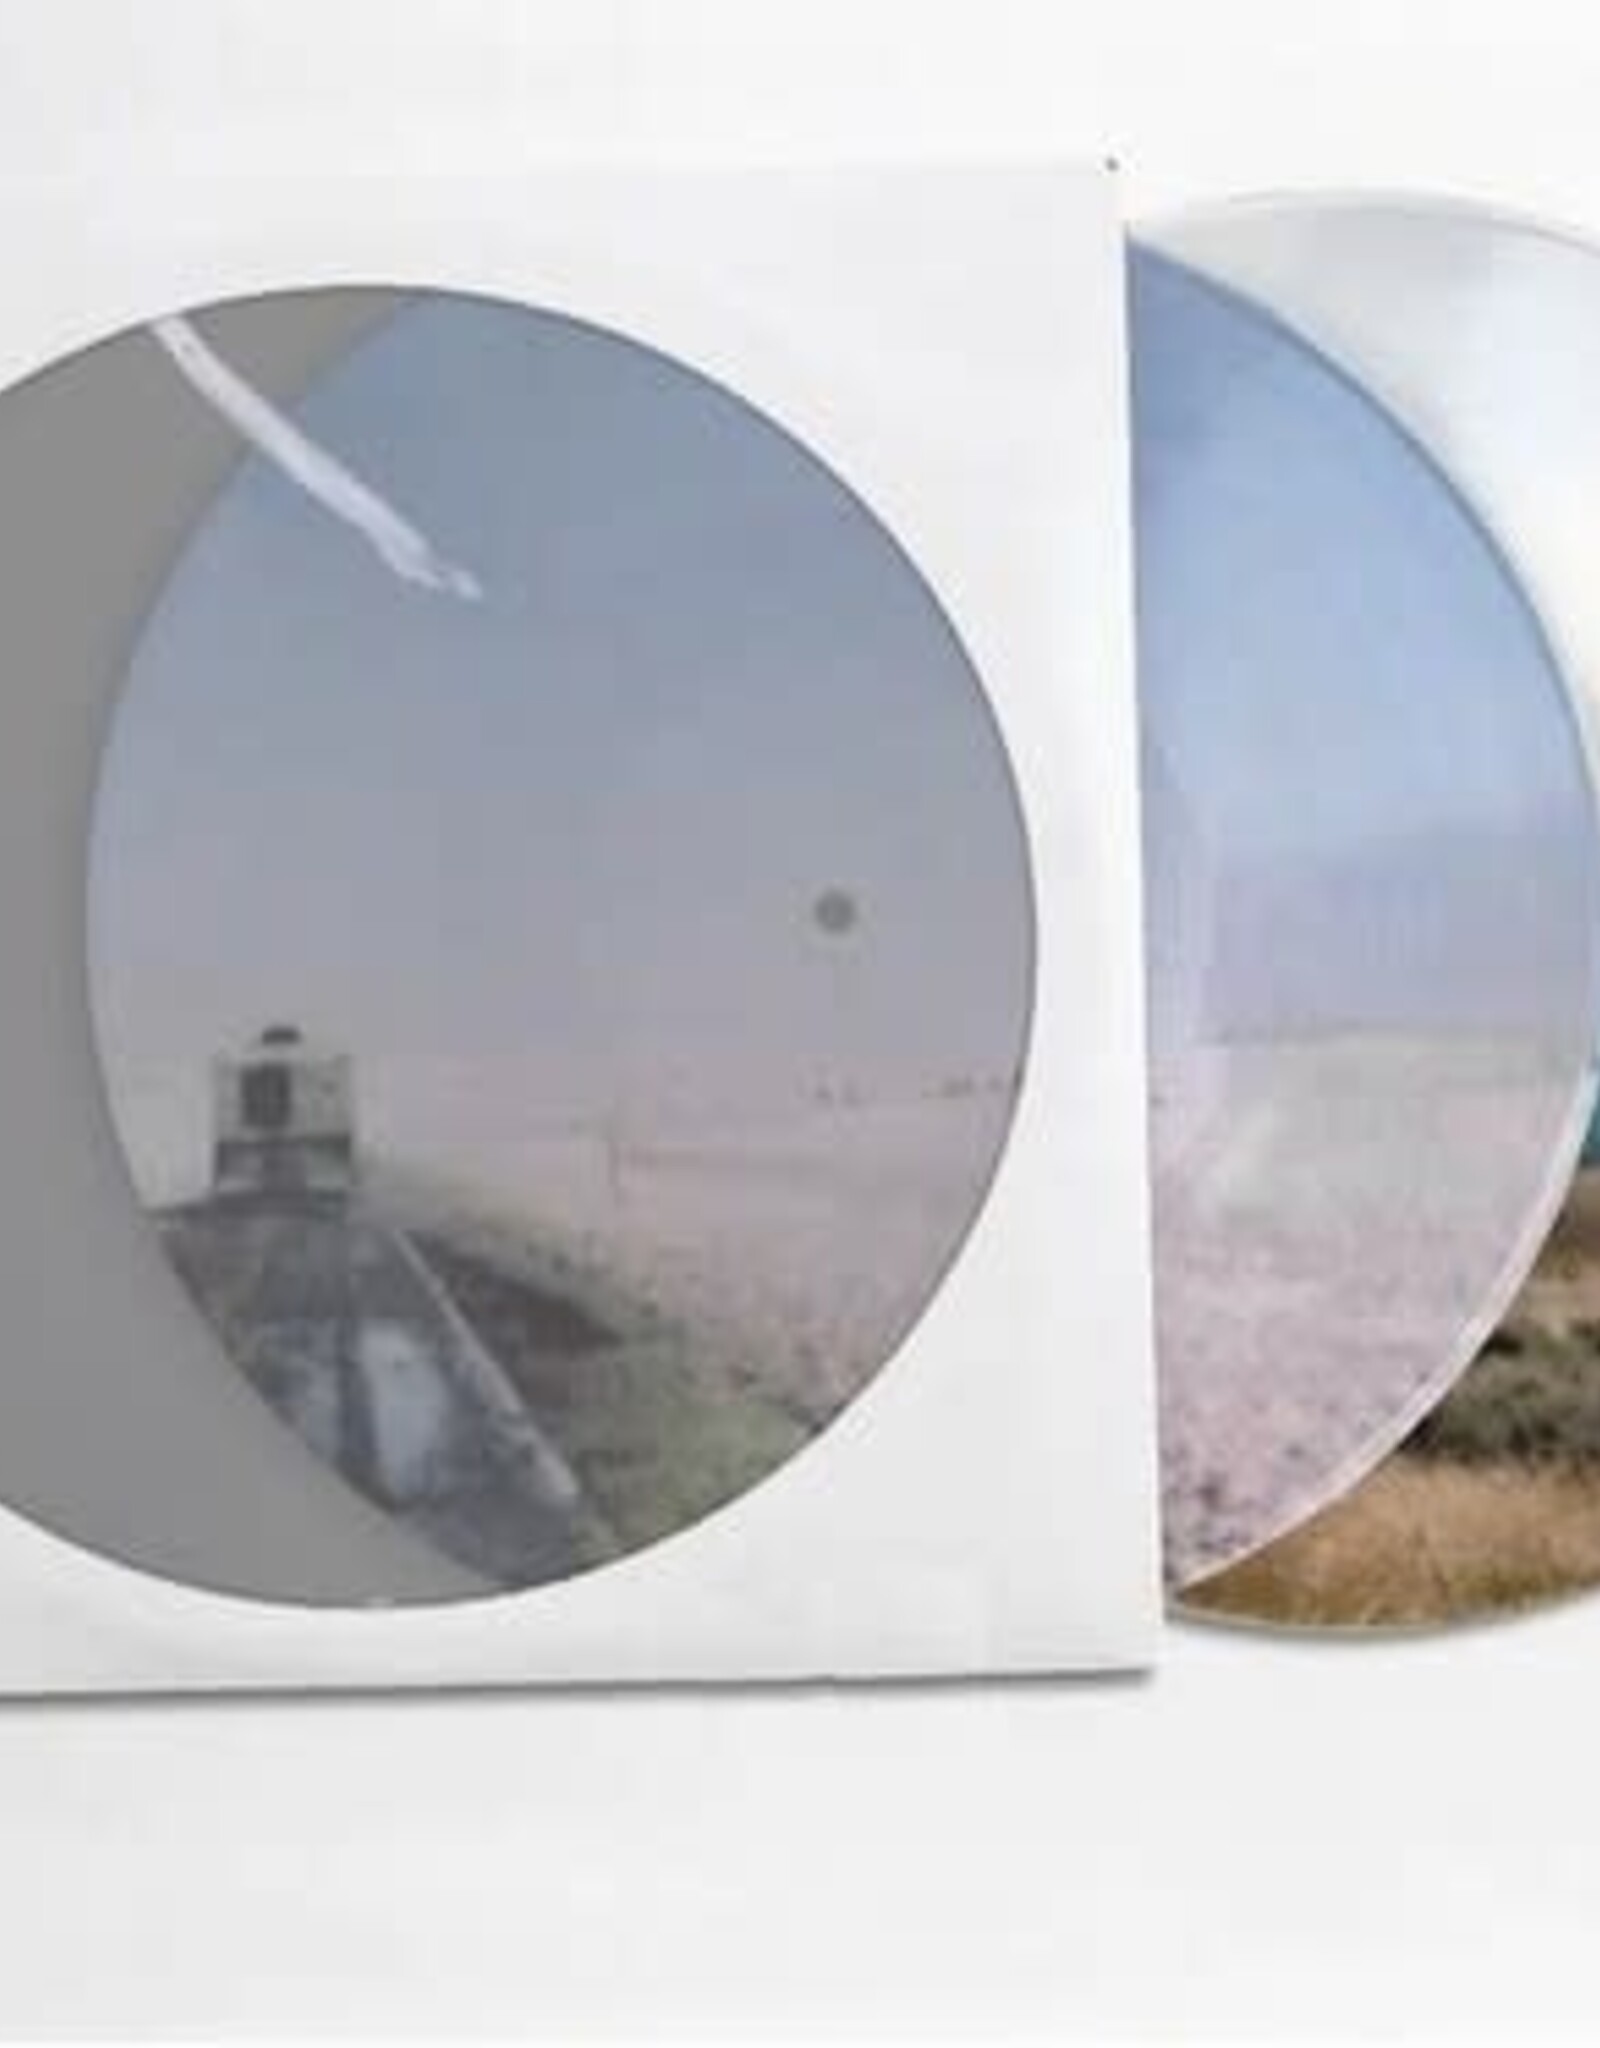 Modest Mouse - The Lonesome Crowded West (Picture Disc Vinyl)